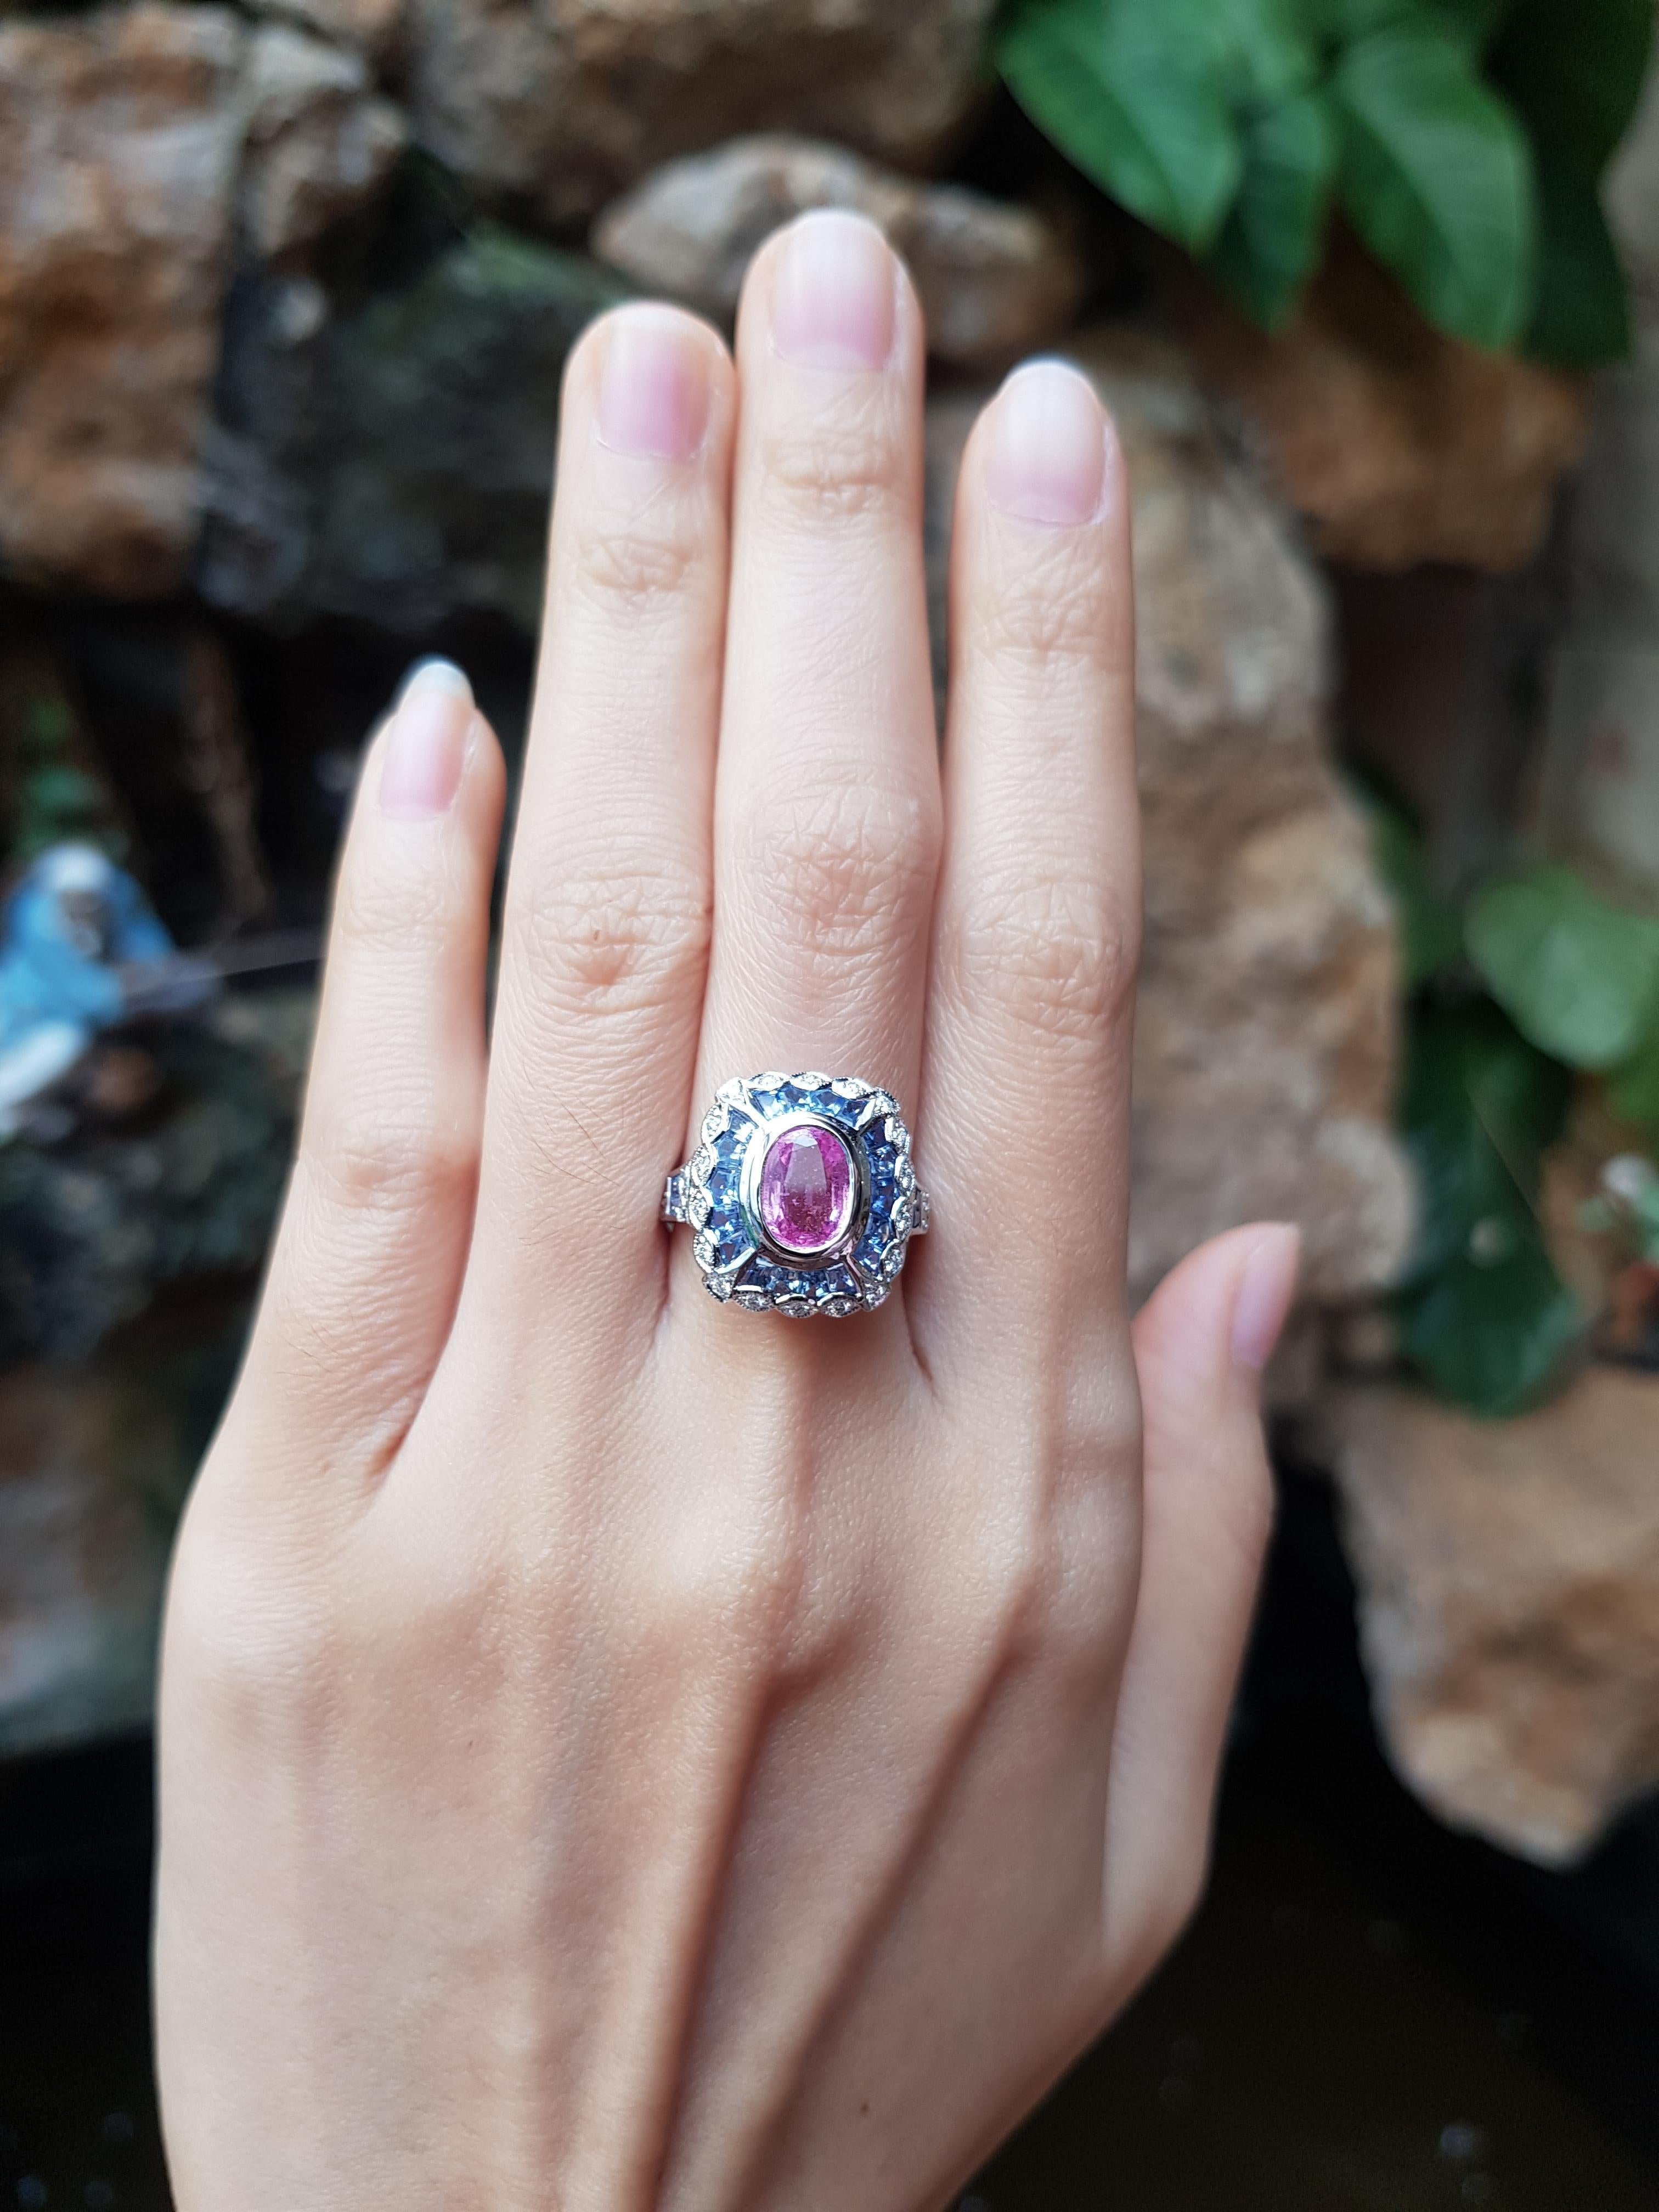 Pink Sapphire 1.60 carats, Blue Sapphire 2.76 carats and Diamond 0.20 carat Ring set in 18 Karat White Gold Settings

Width:  1.6 cm 
Length: 1.7 cm
Ring Size: 53
Total Weight: 7.14 grams

